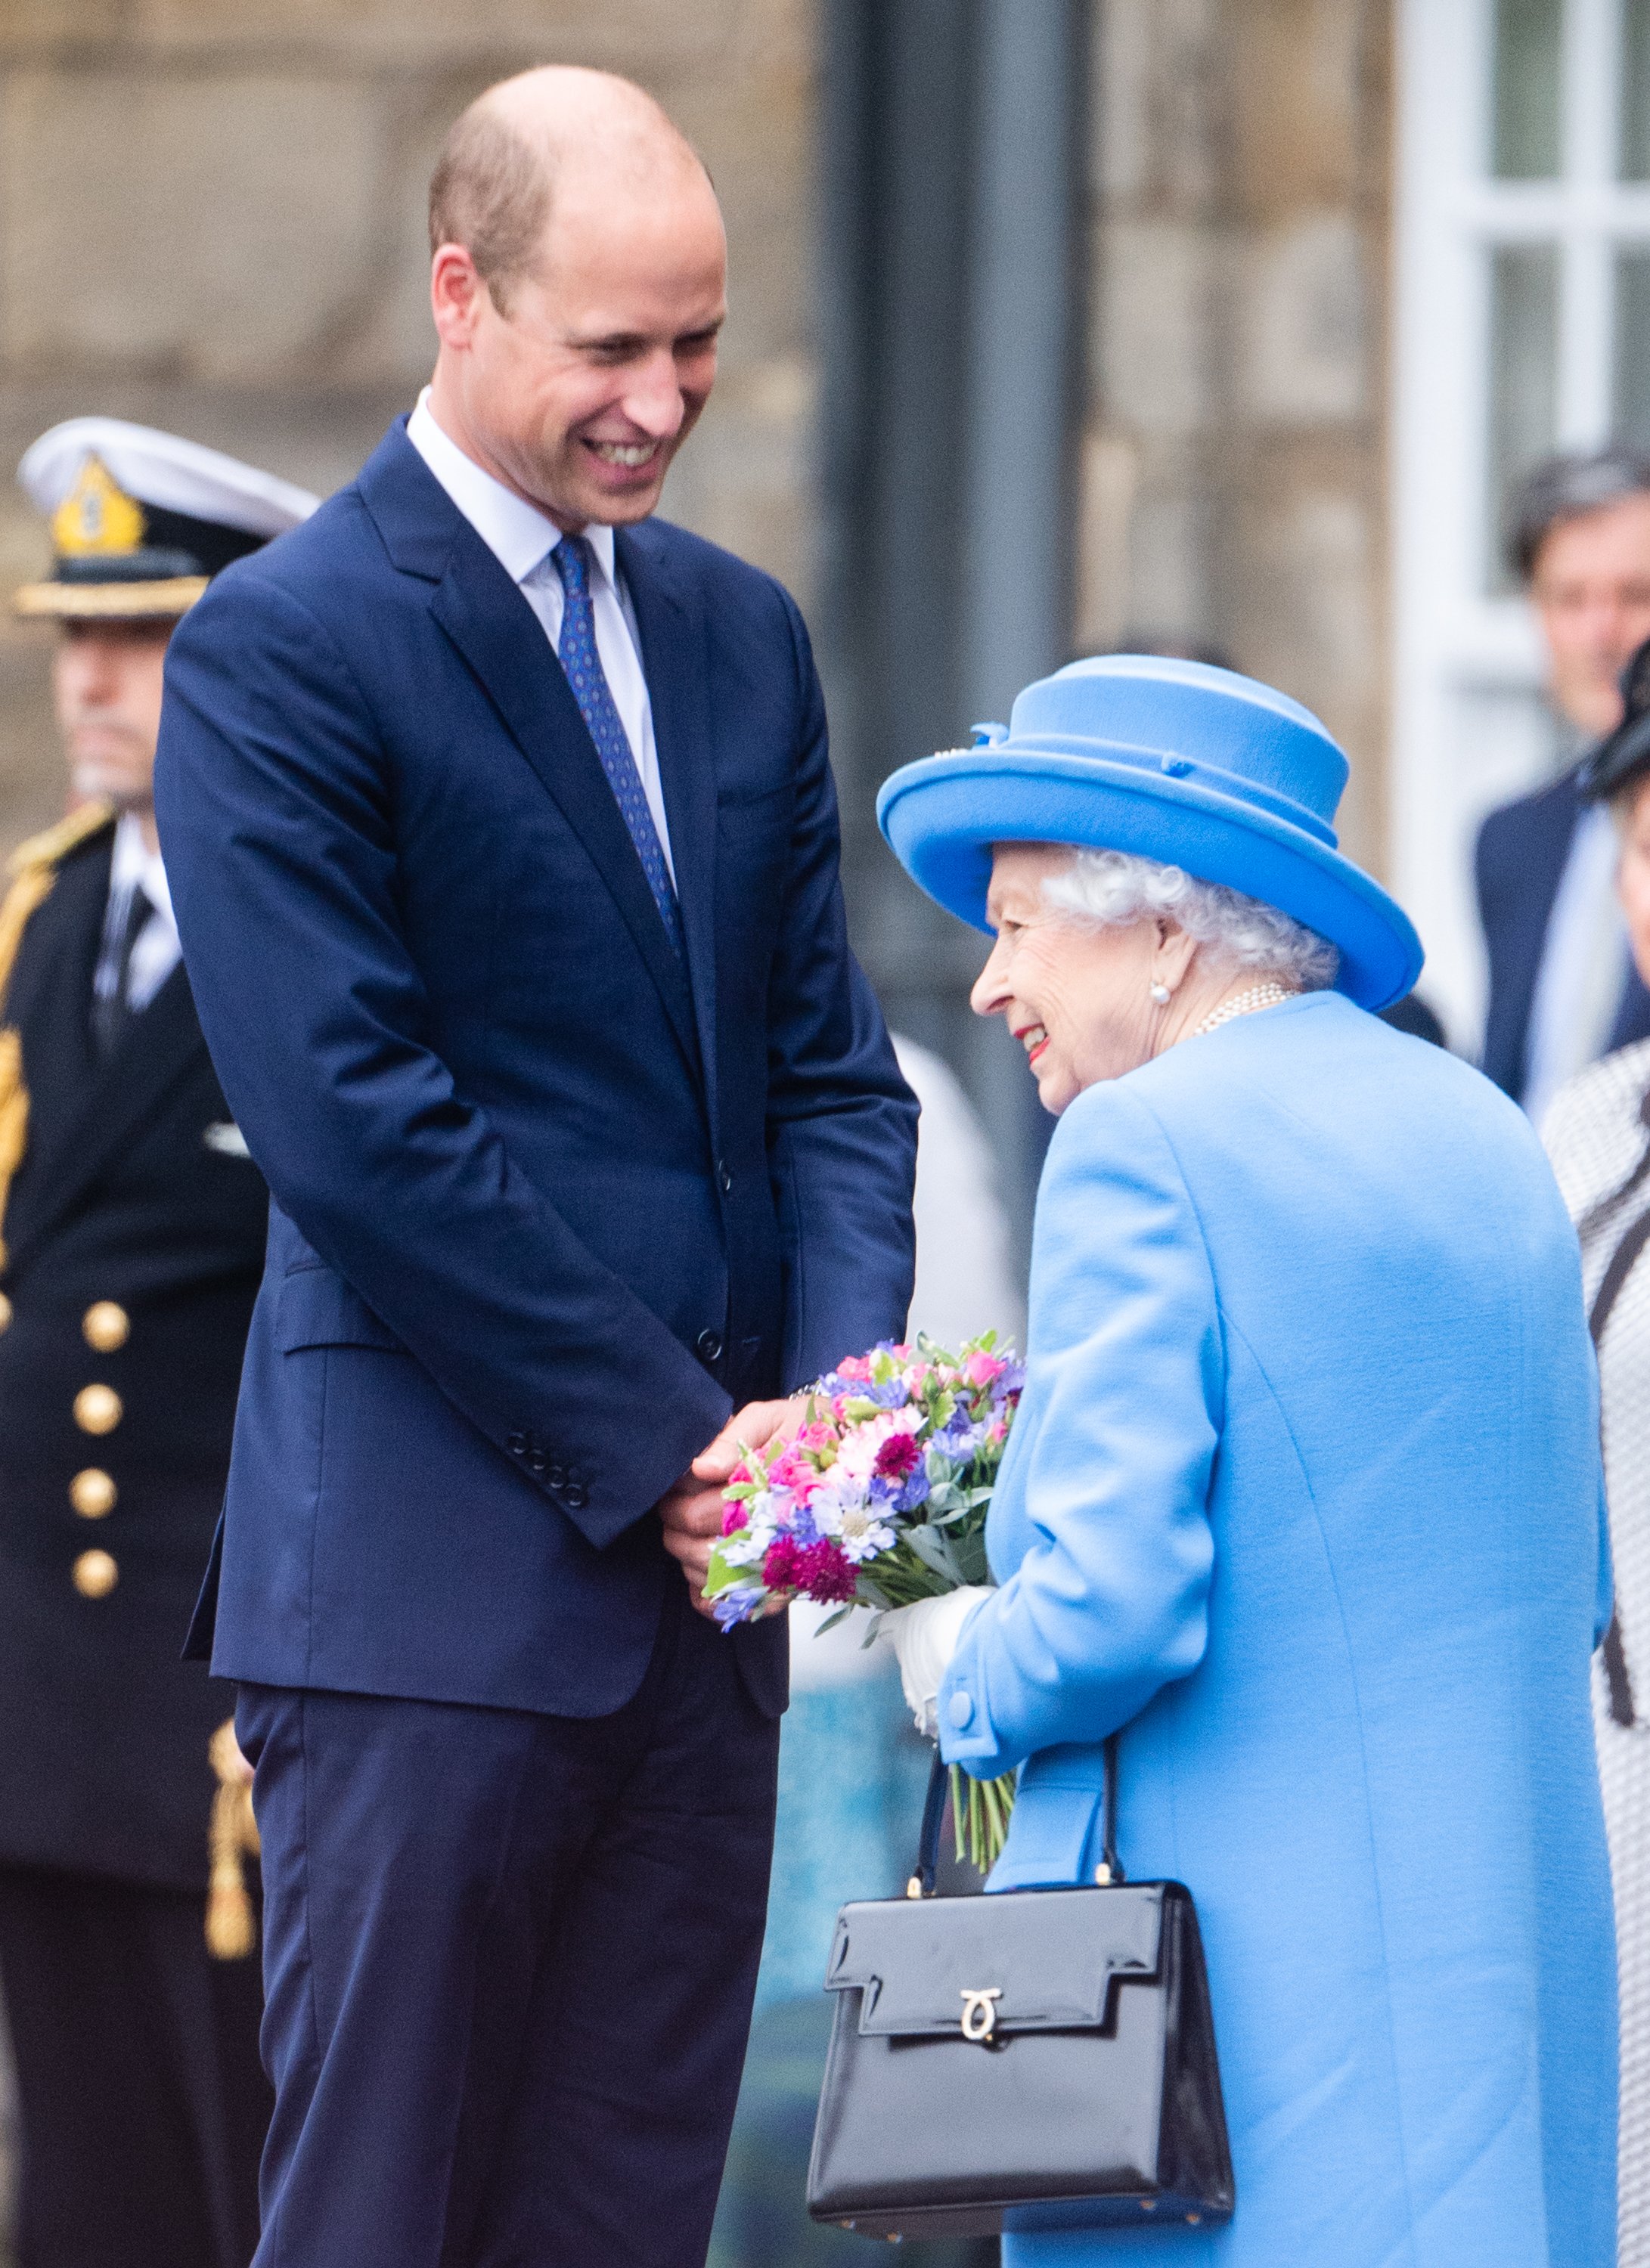 Queen Elizabeth II and Prince William attend The Ceremony of the Keys at The Palace Of Holyroodhouse on June 28, 2021 in Edinburgh, Scotland | Source: Getty Images